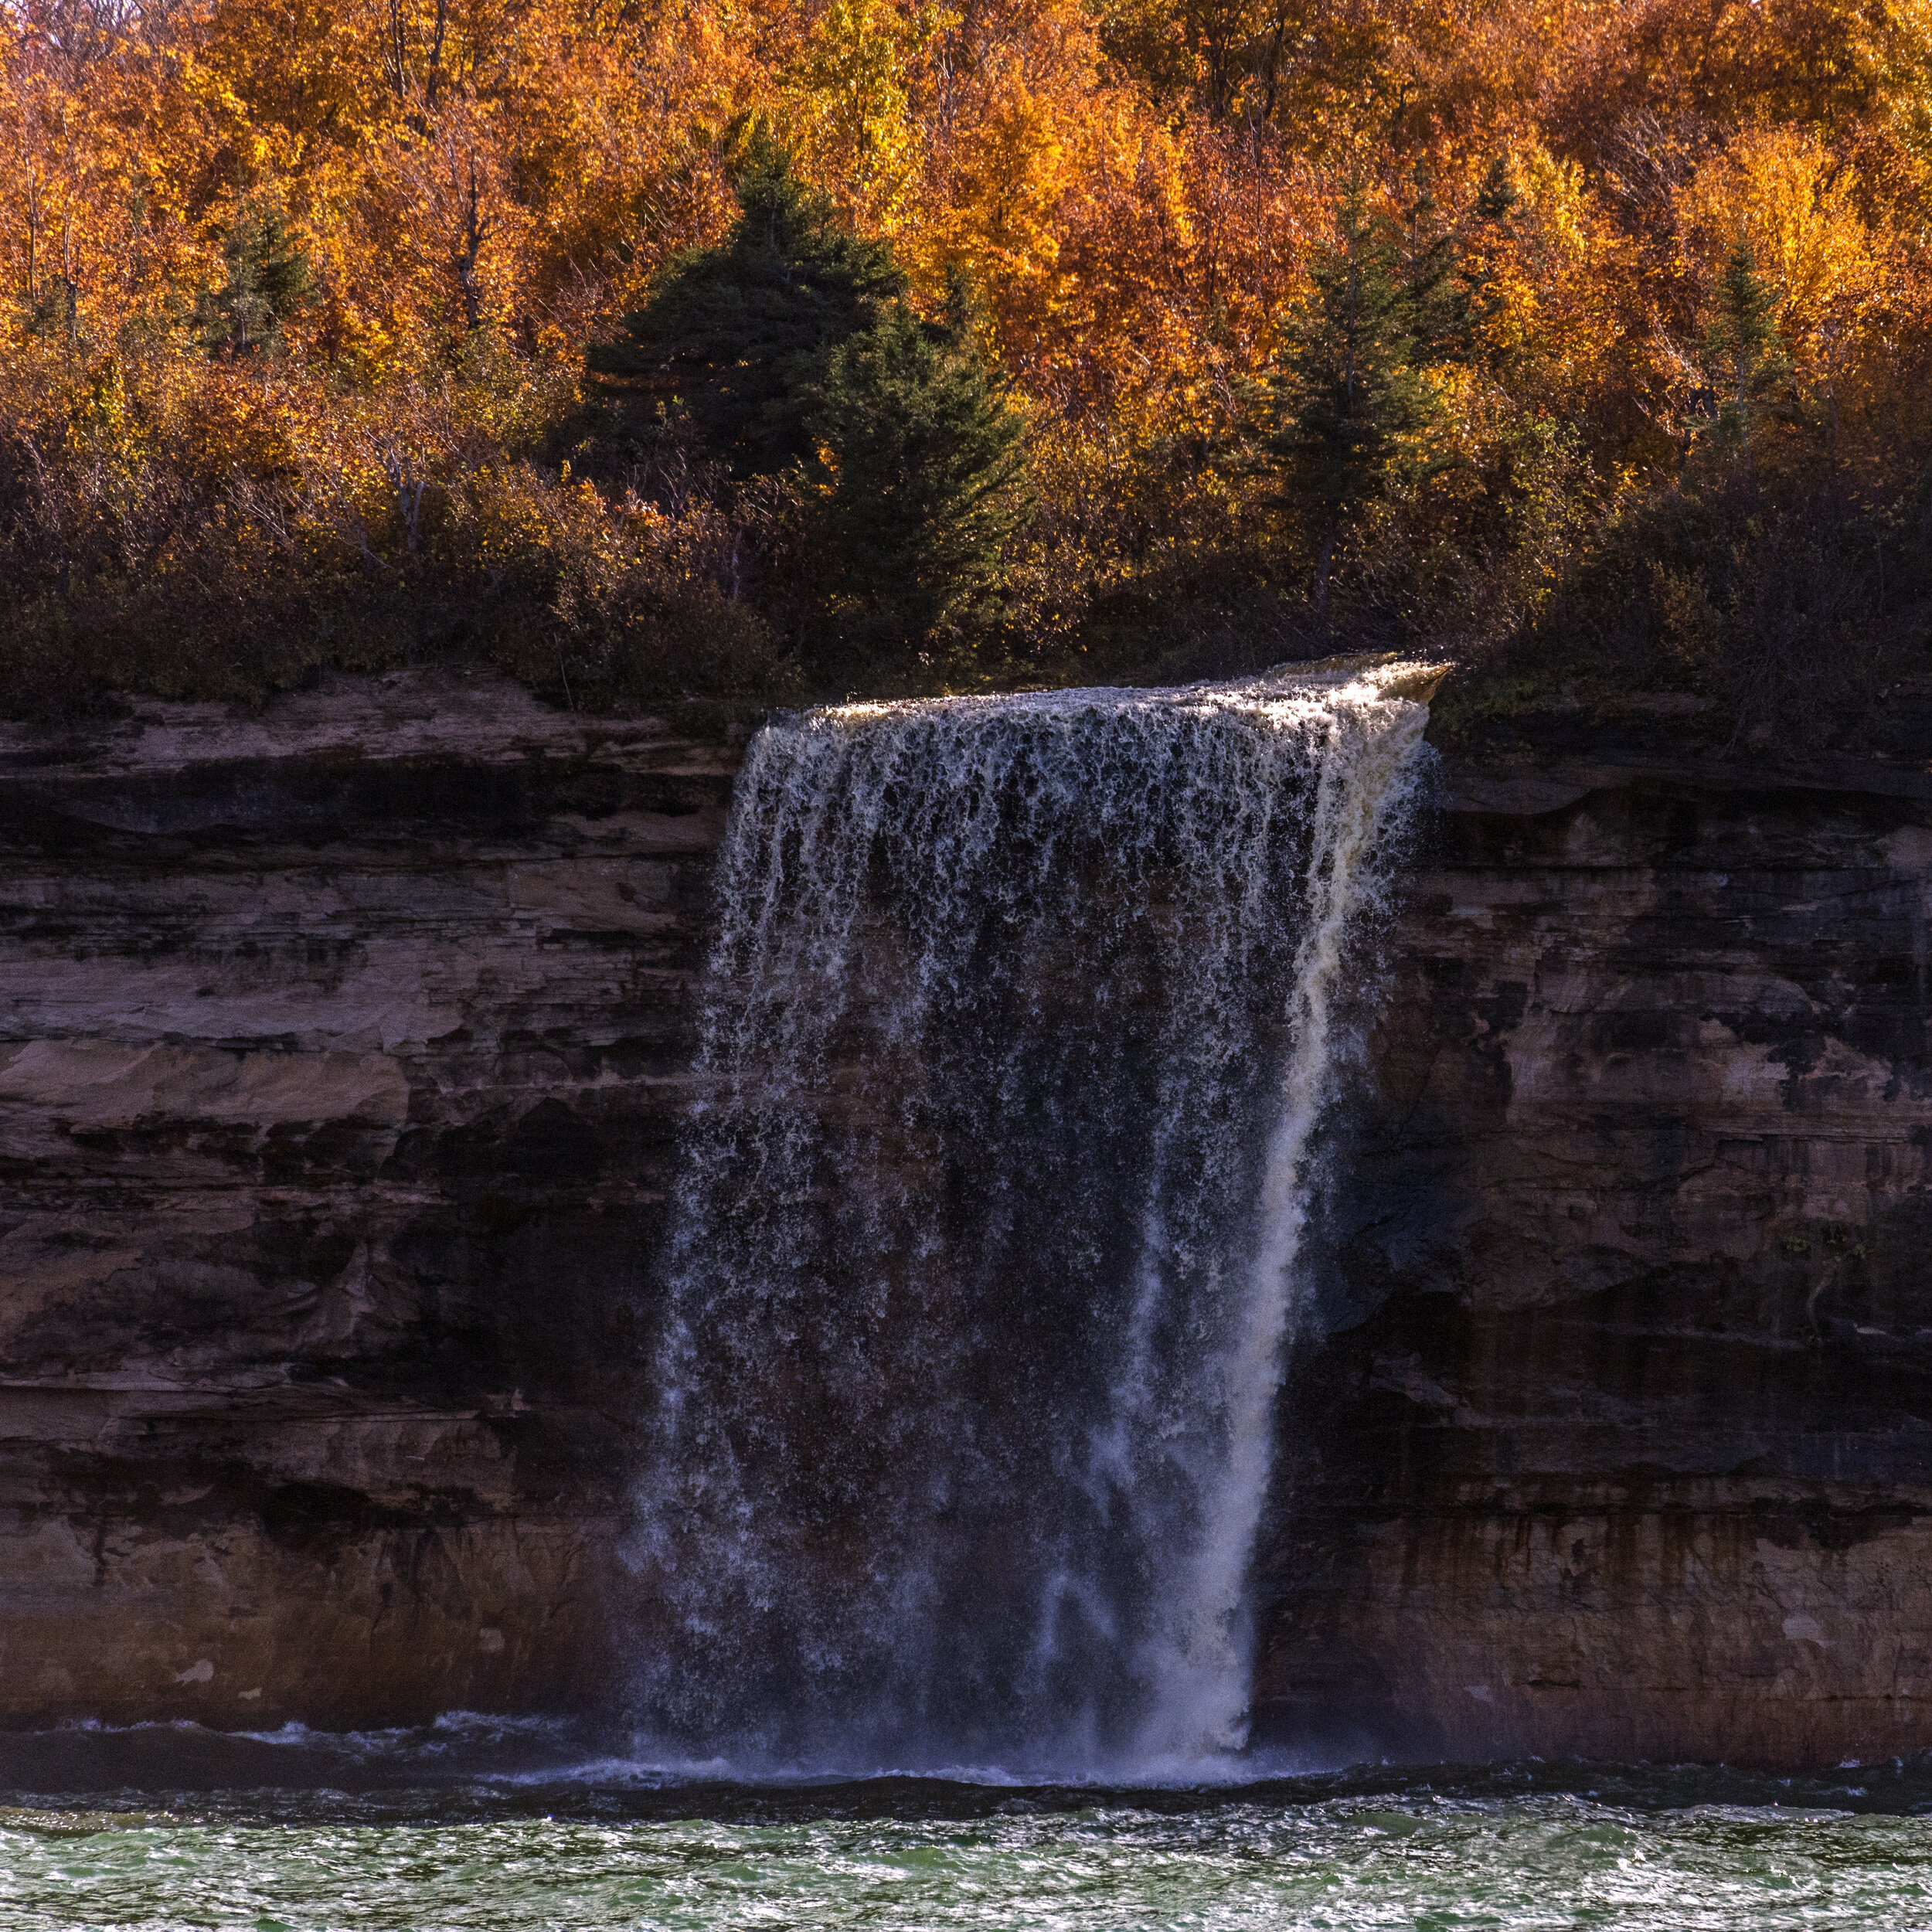  Spray Falls at the Picture Rock Boat Cruise in Northern Michigan 